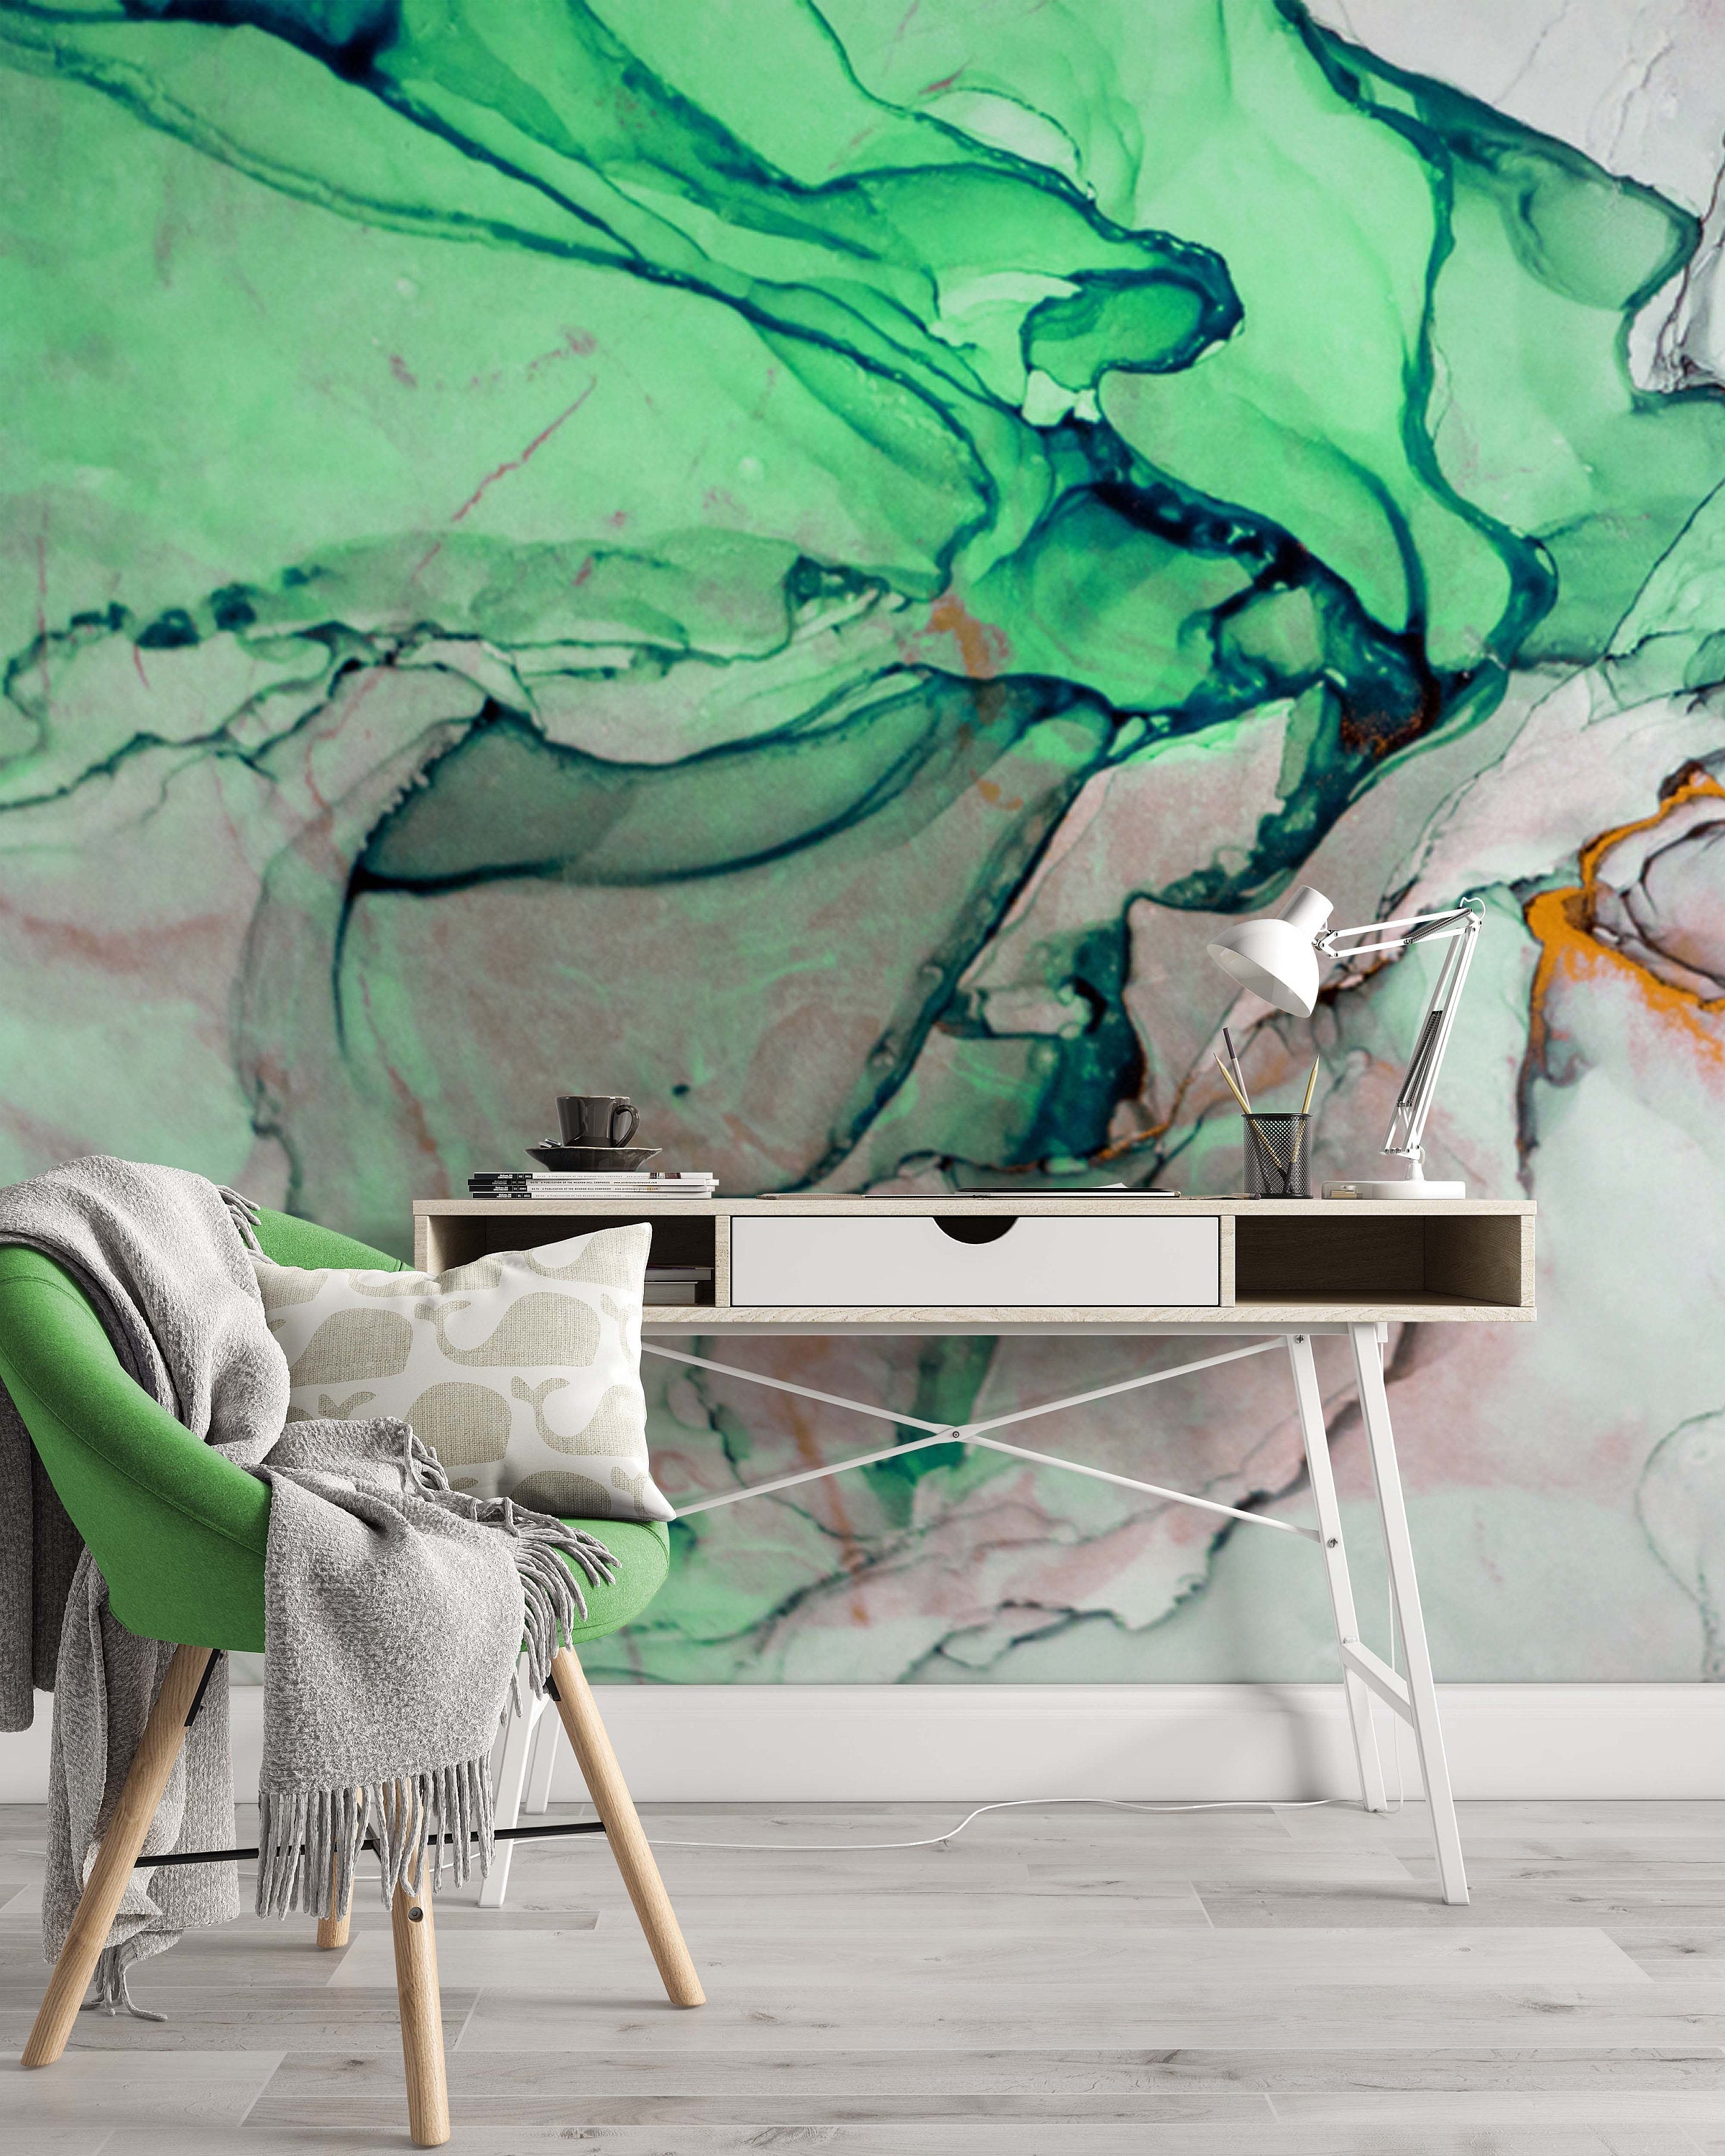 Illustration Ink Paint Abstract Oil Painting Vivid Green Wallpaper Cafe Restaurant Decoration Living Room Bedroom Mural Home Decor Wall Art